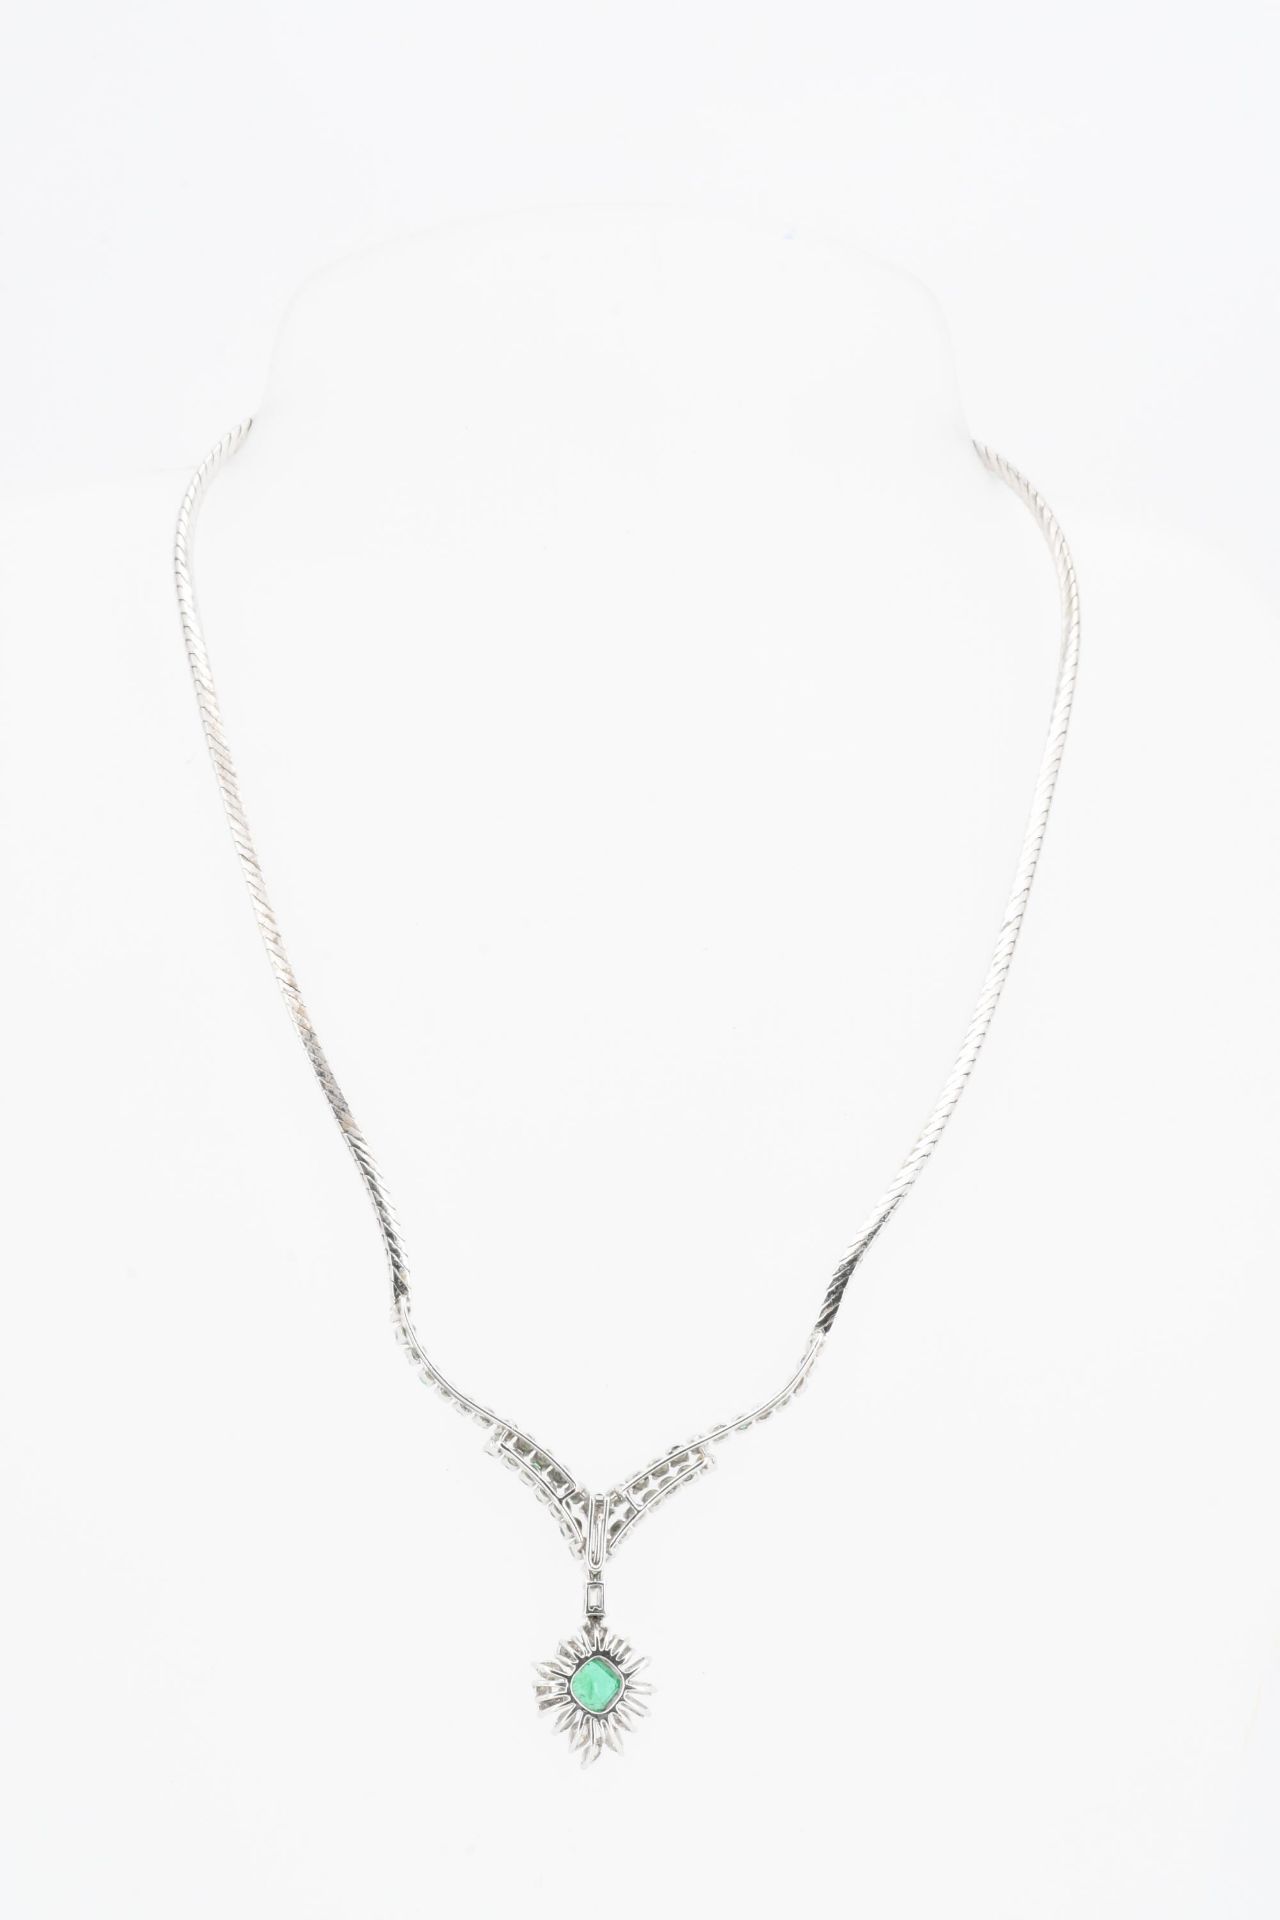 Tennis Necklace - Image 4 of 5